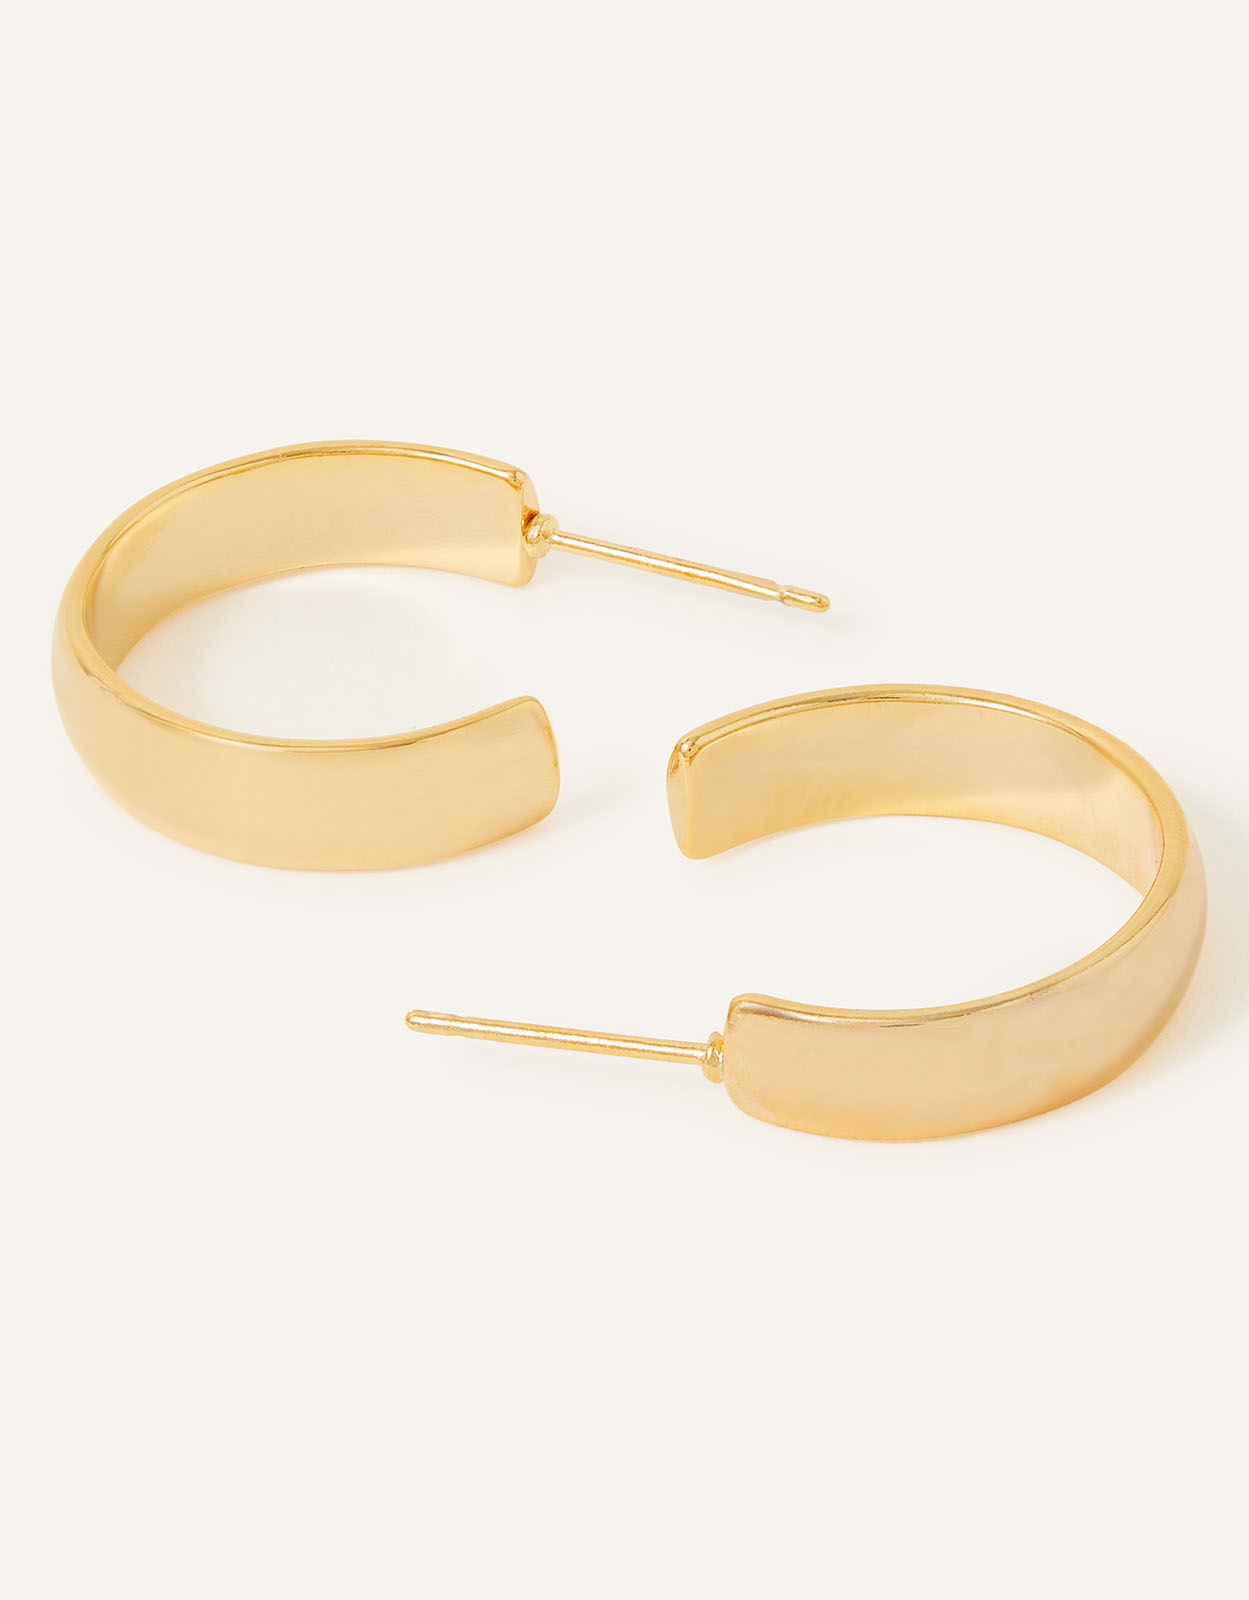 Accessorize Women's Gold 14ct Small Chunky Hoops, Size: 2x5cm